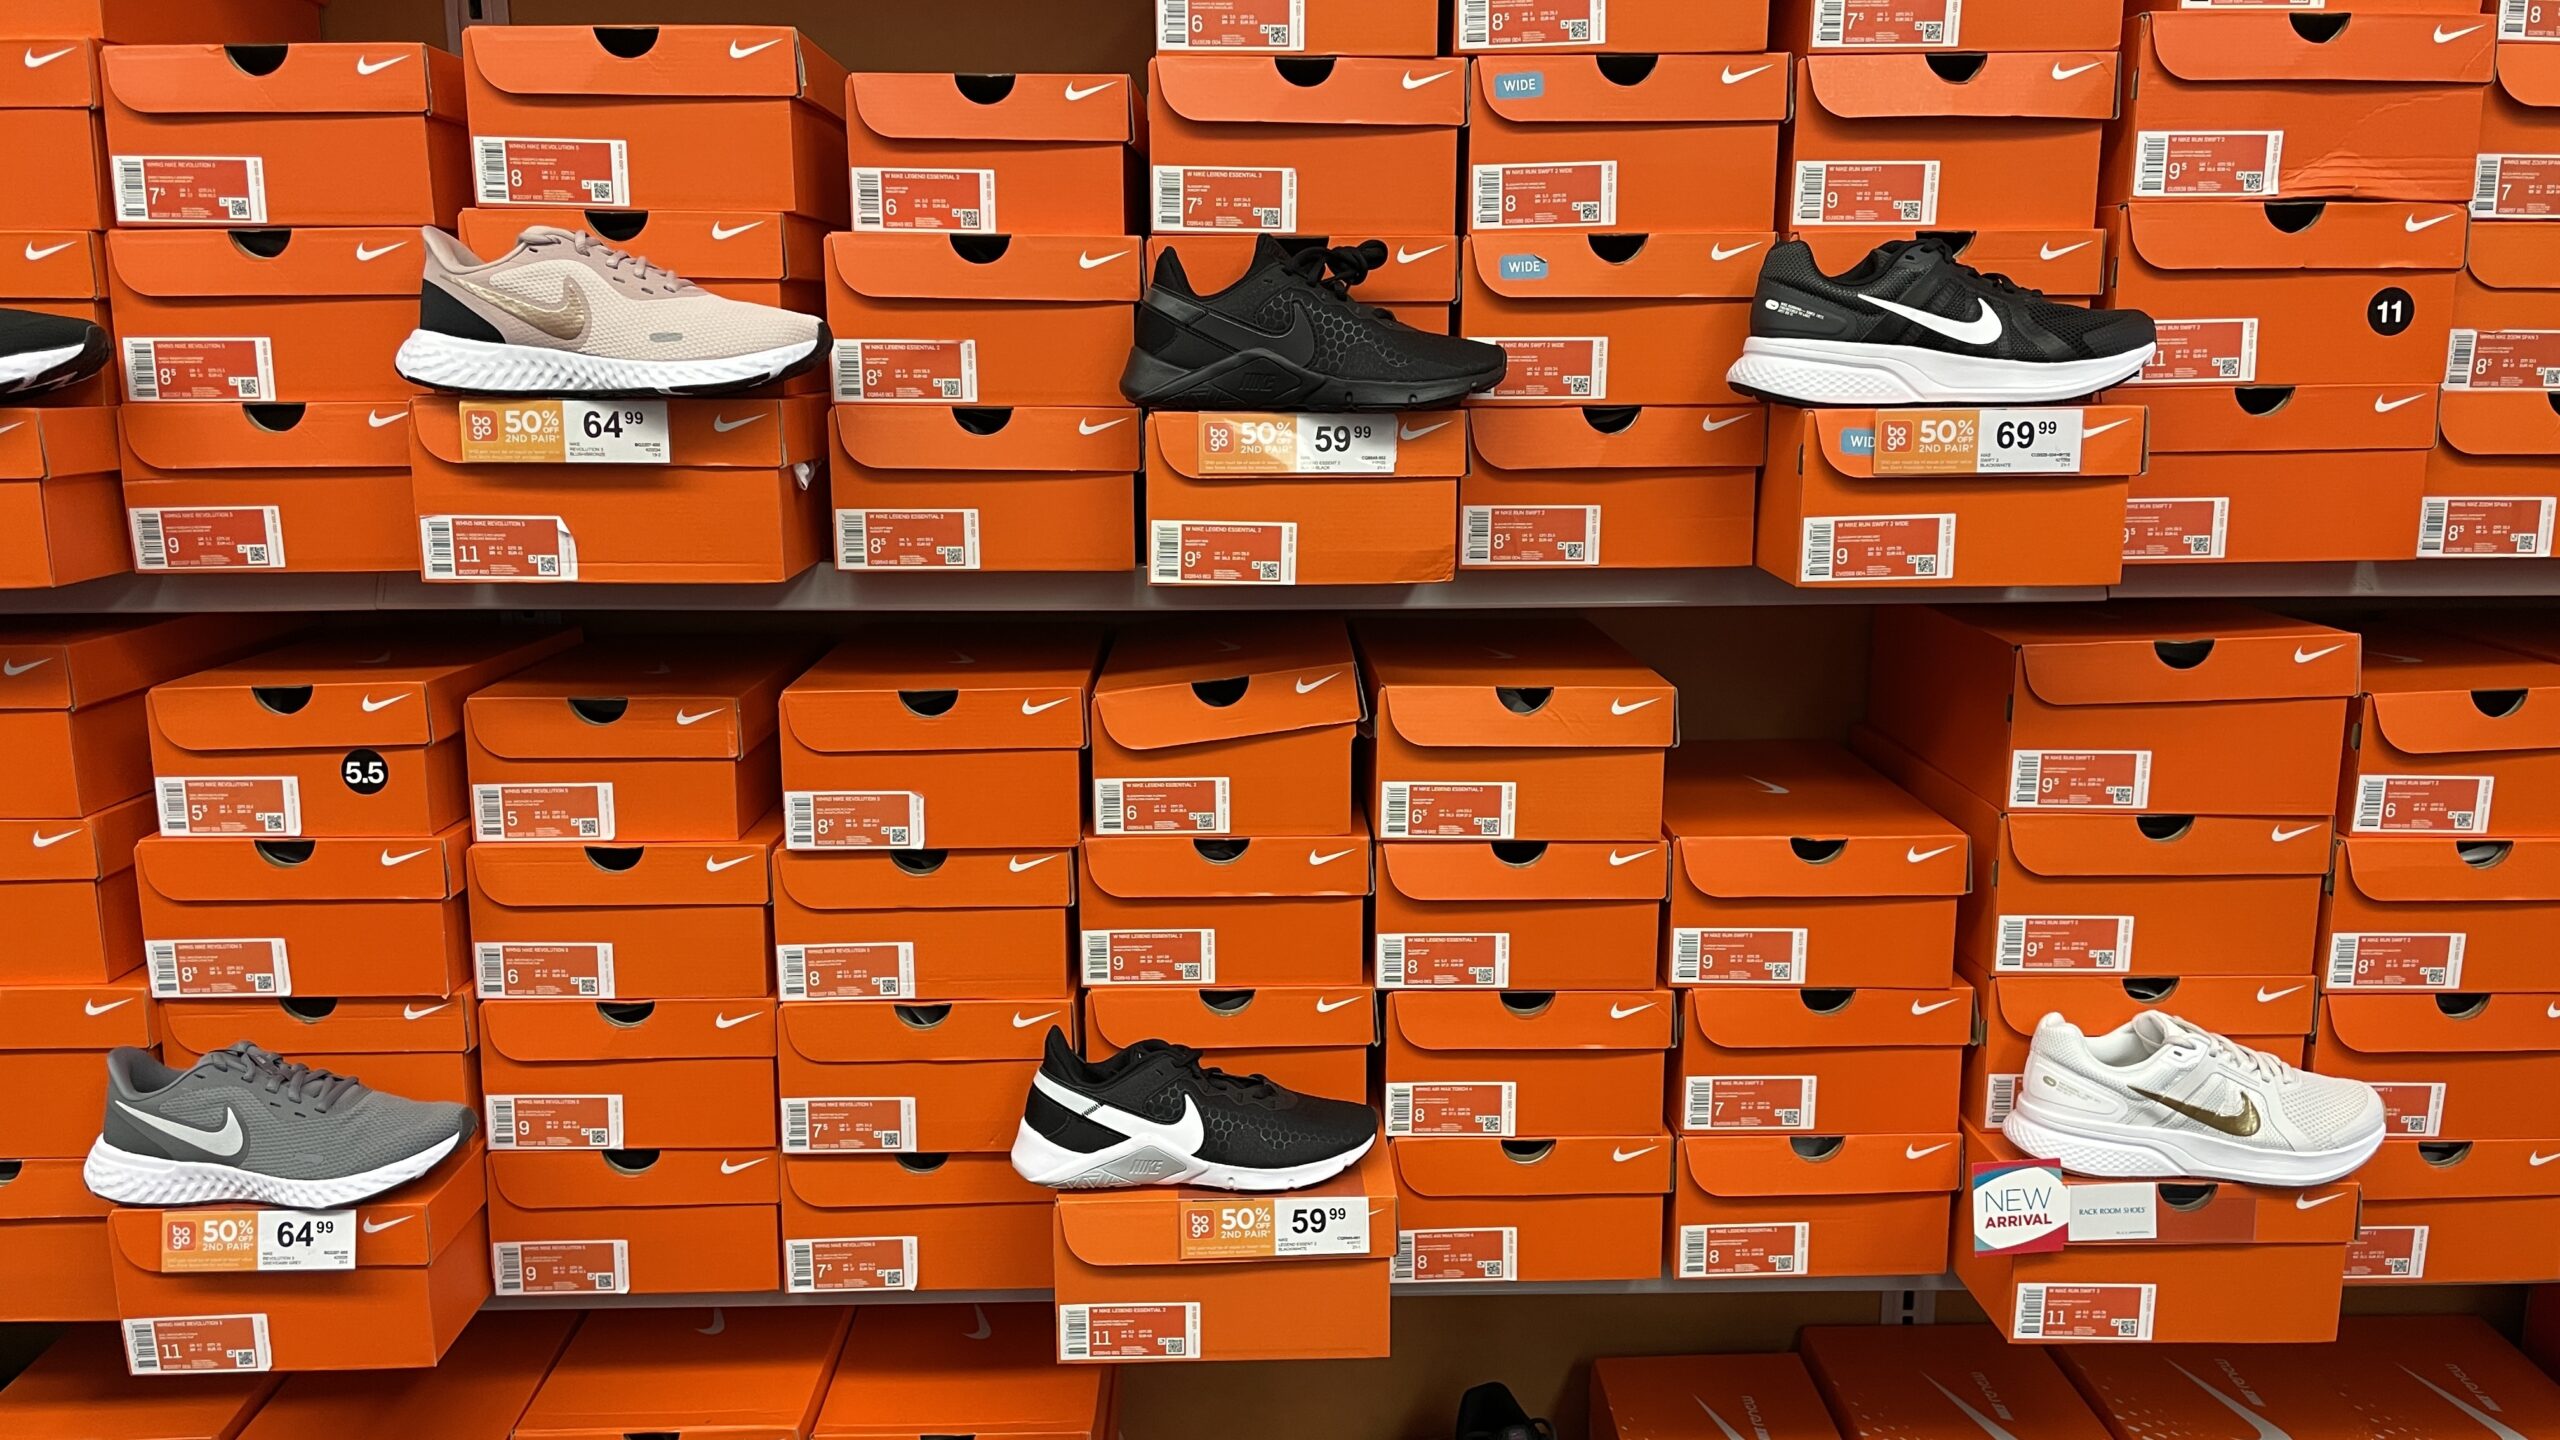 BUY ONE GET ONE 50% OFF SELECT NIKE SHOES - The Freebie Guy®